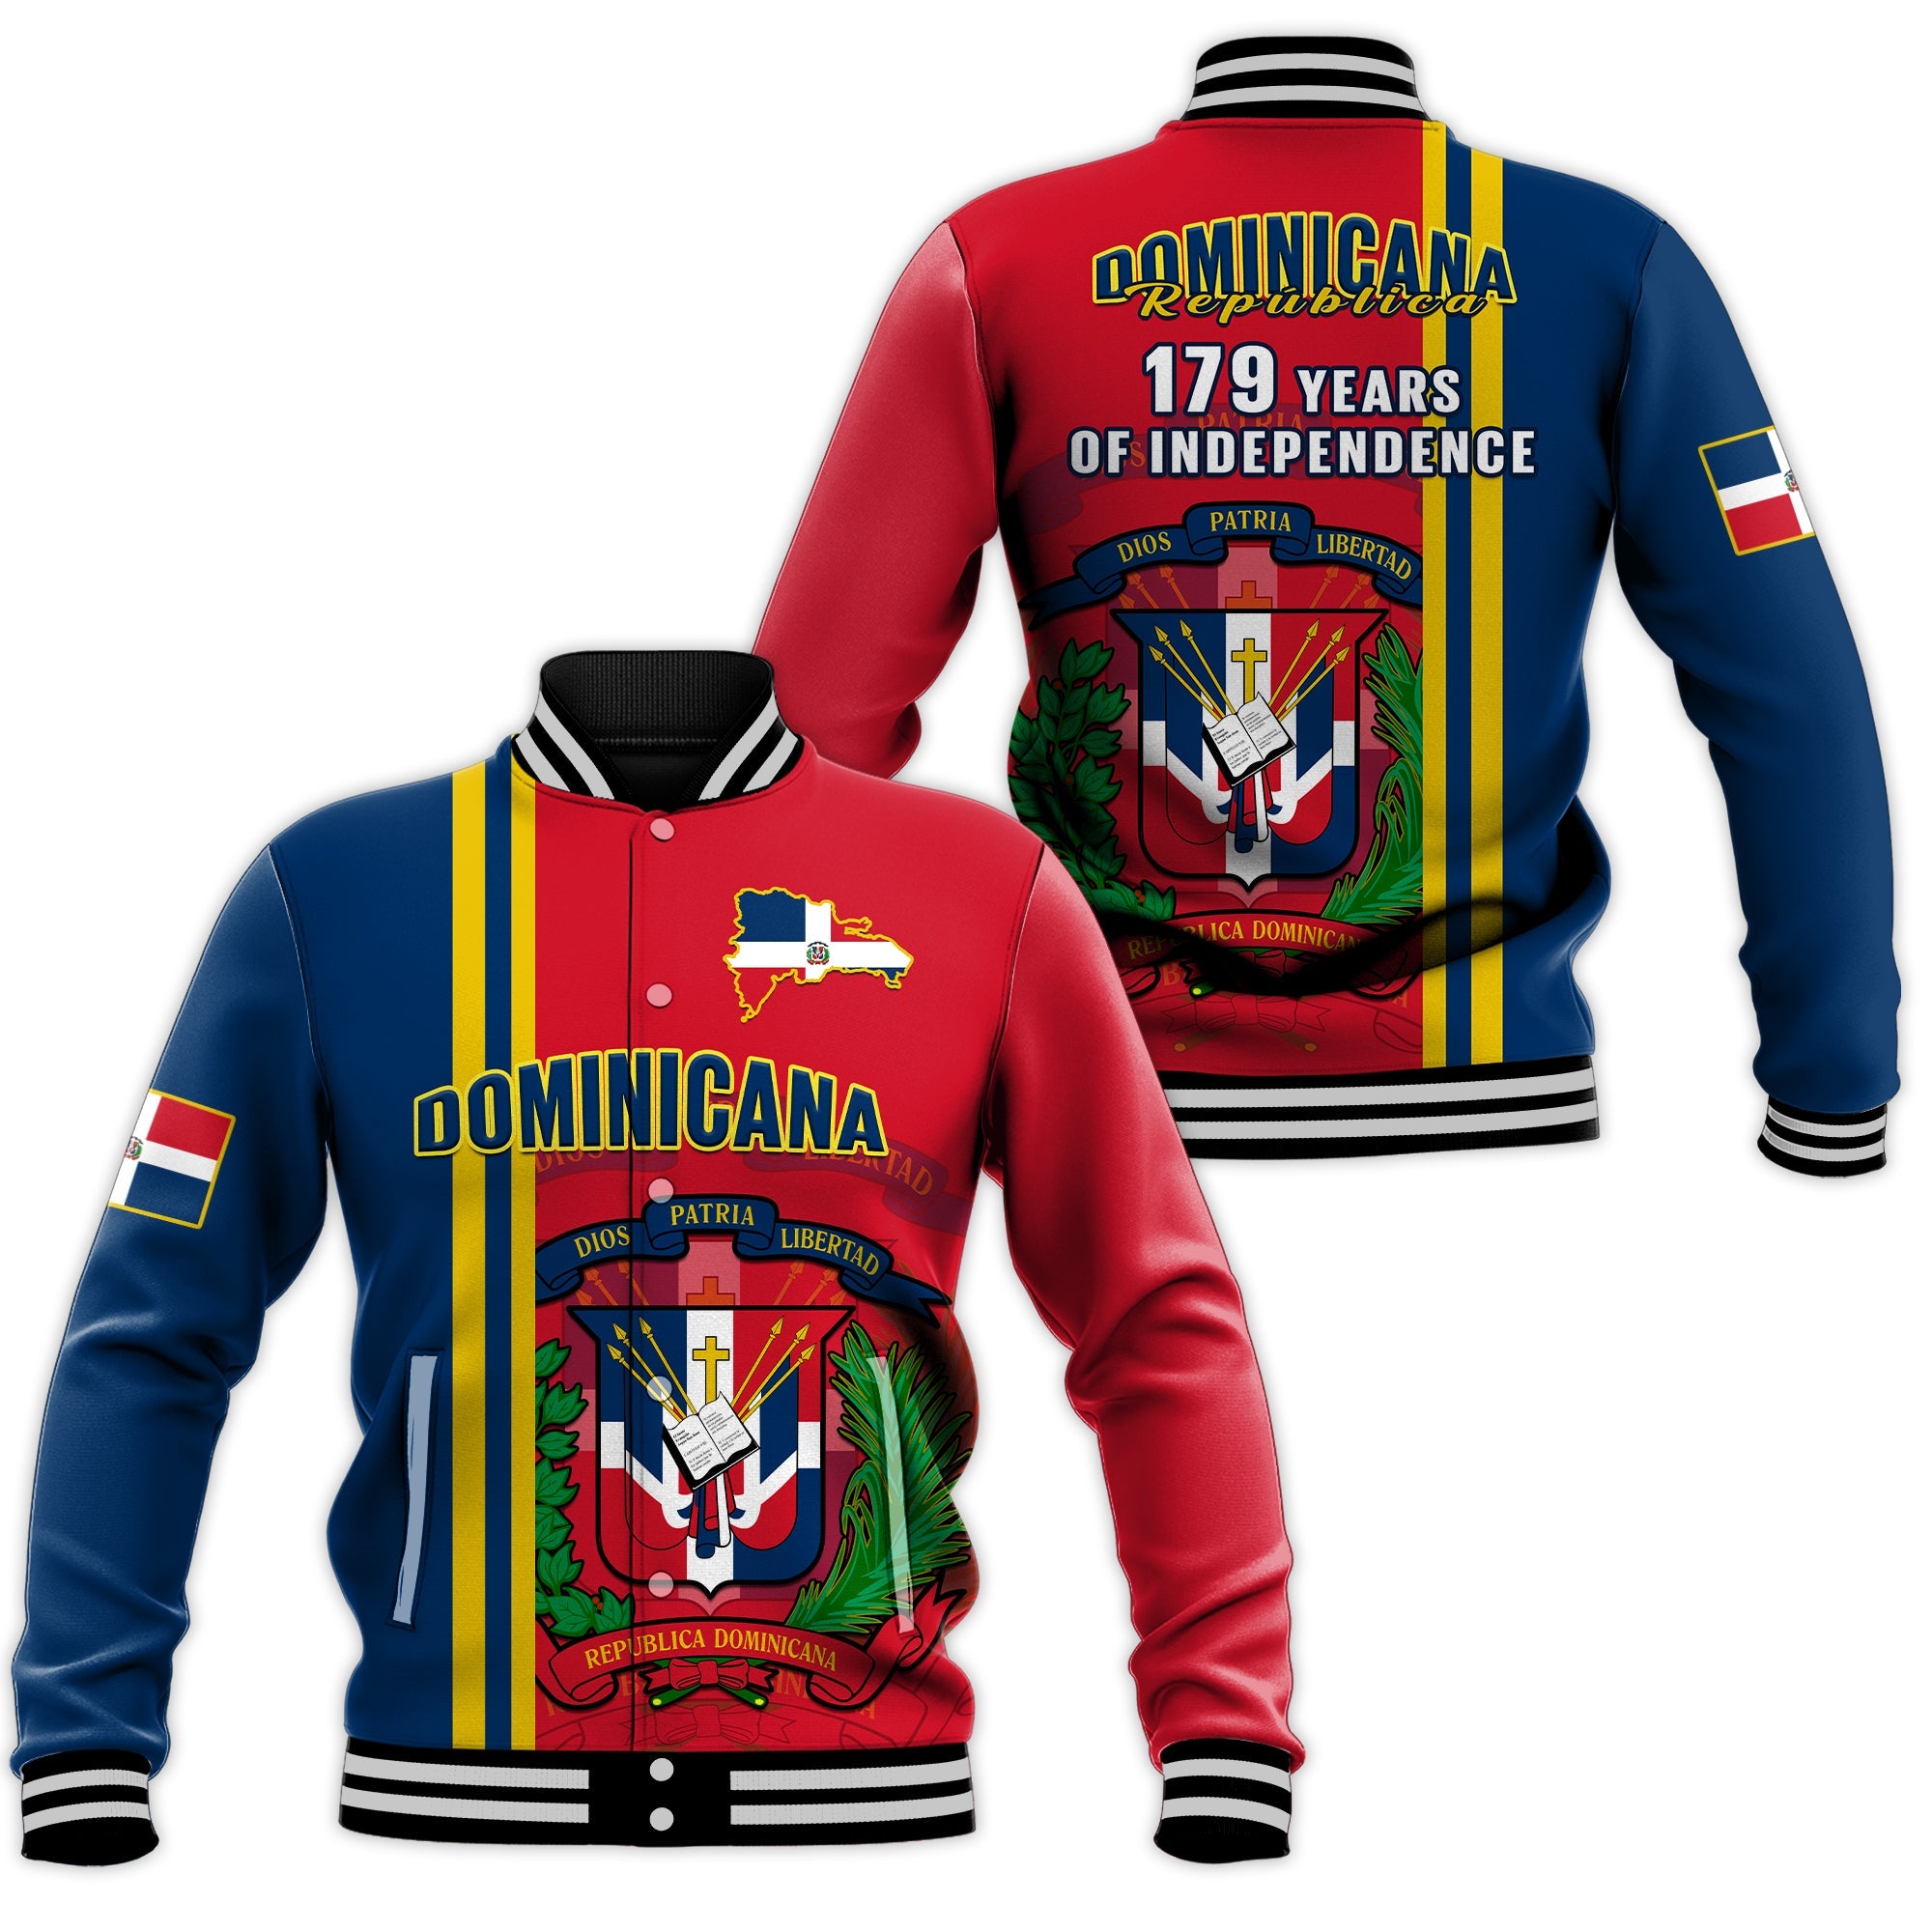 dominican-republic-baseball-jacket-happy-179-years-of-independence